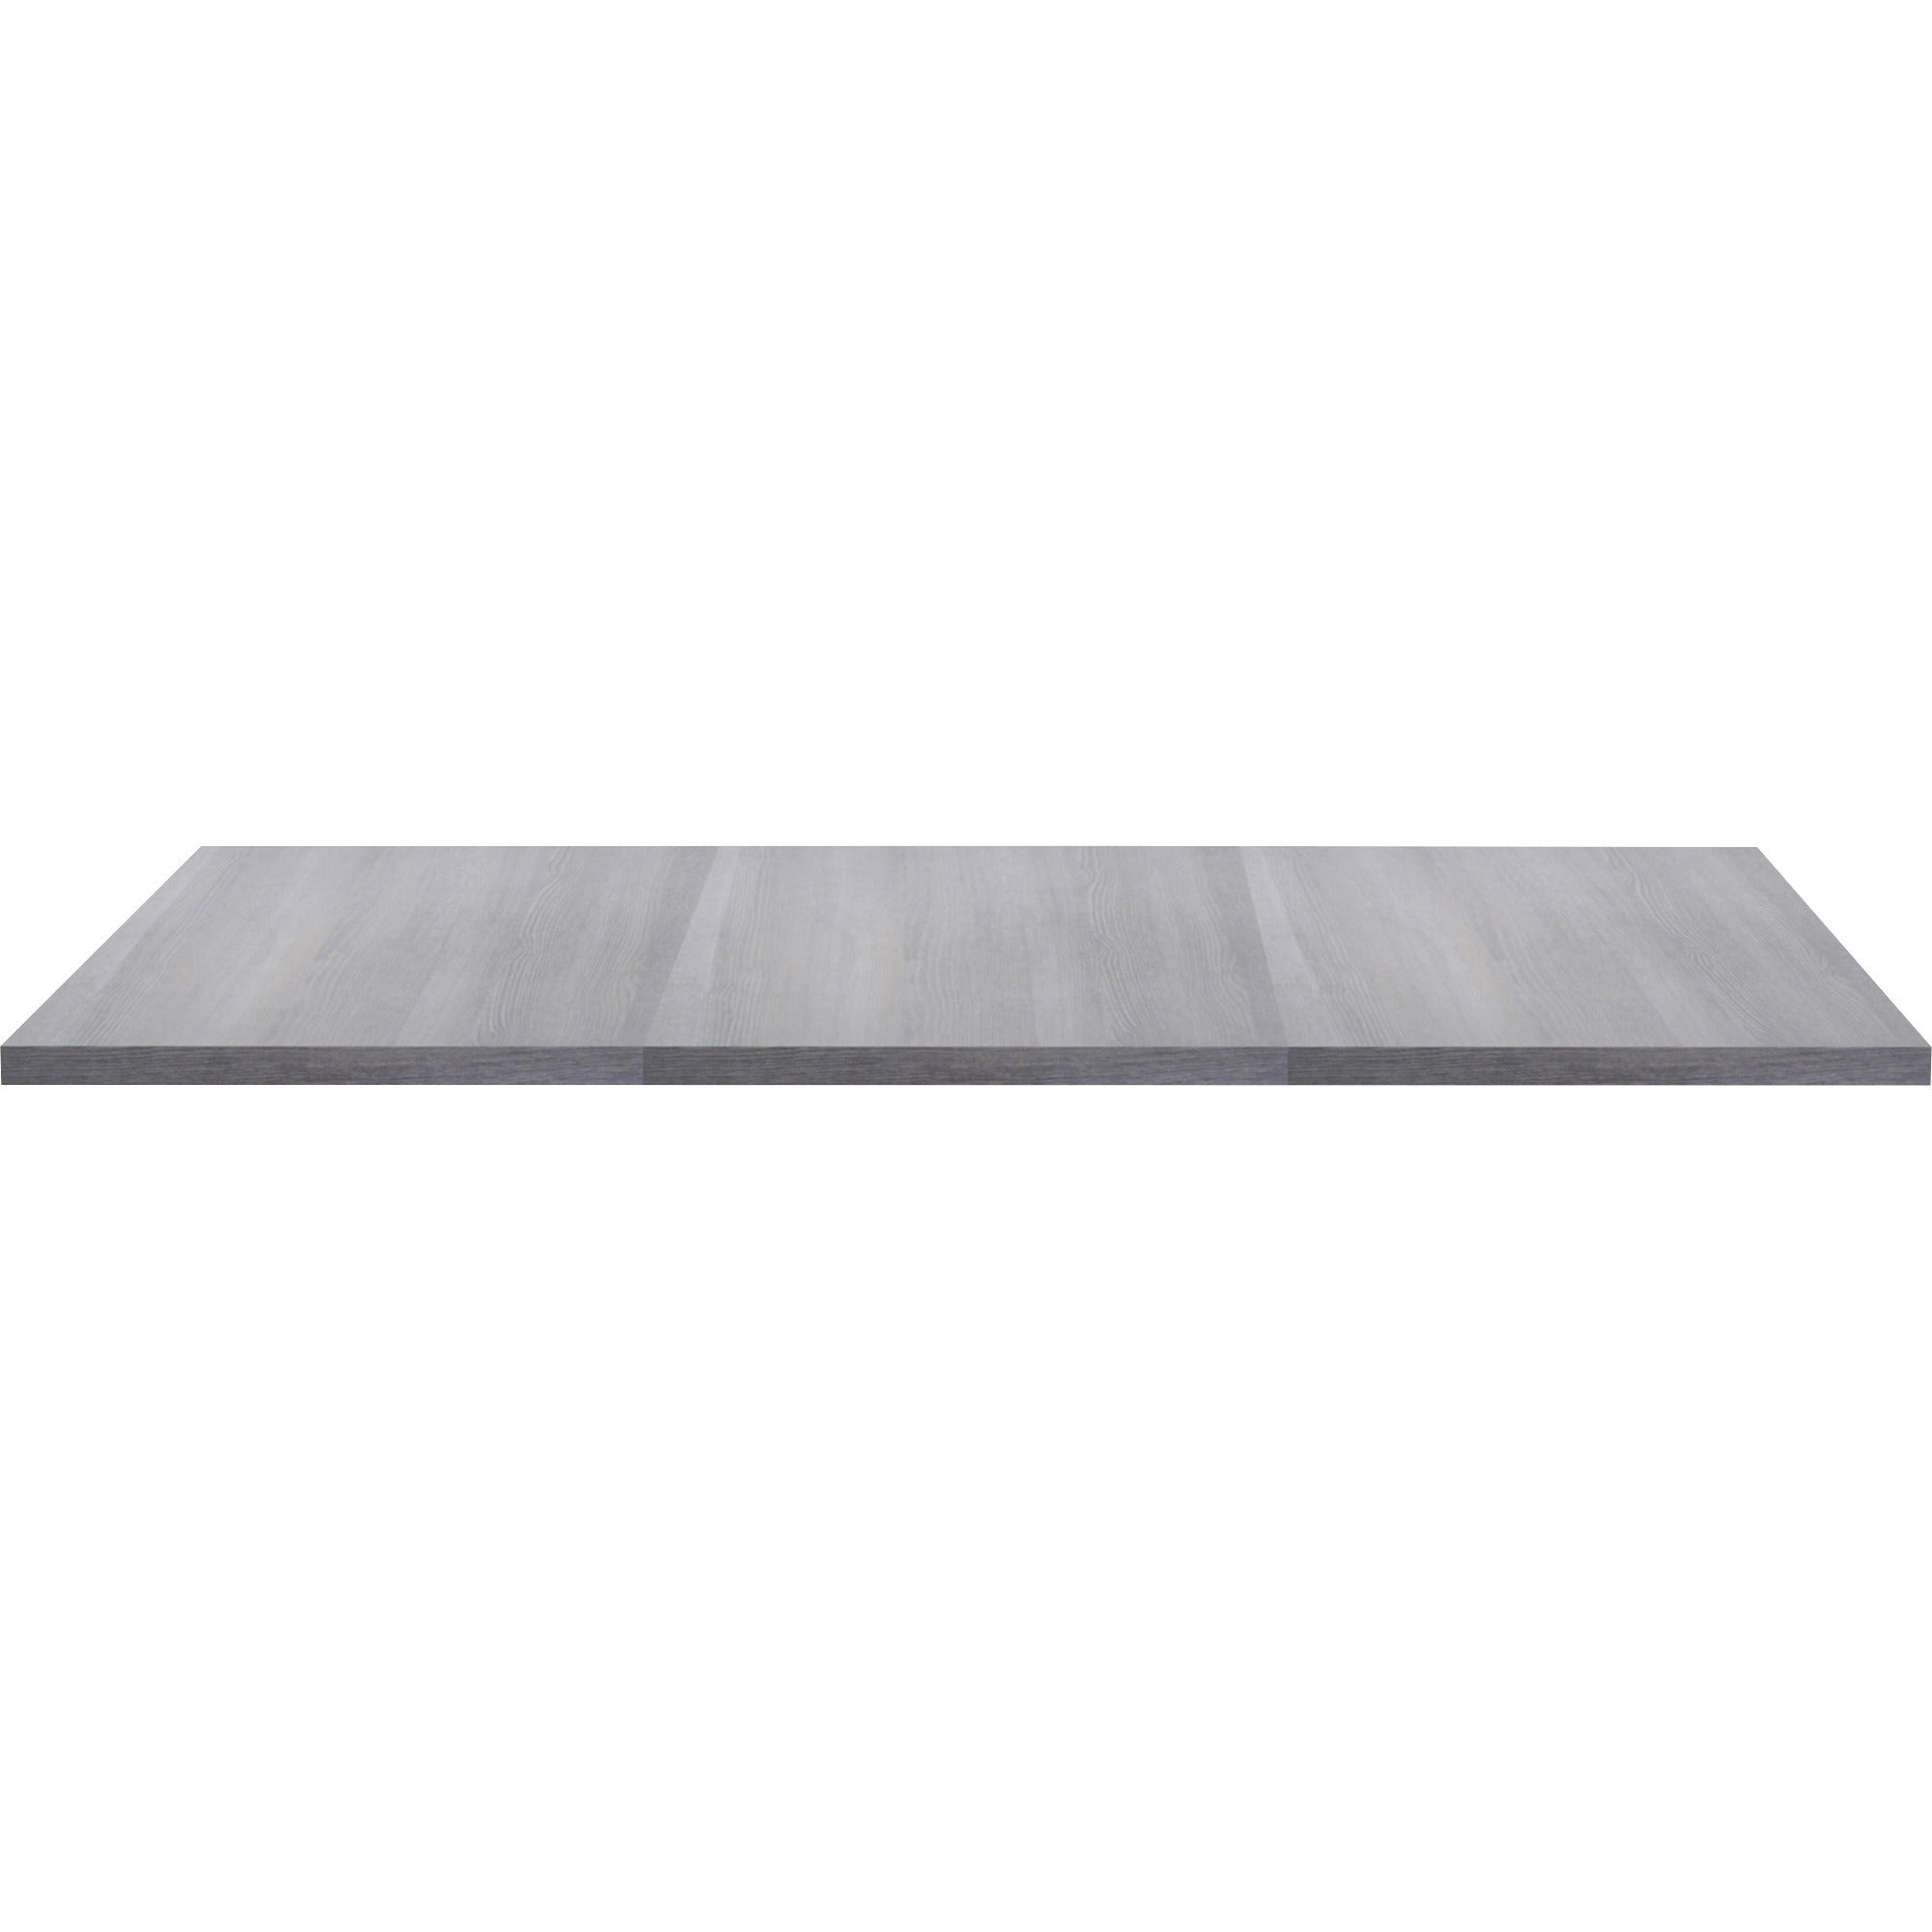 lorell-revelance-conference-rectangular-tabletop-716-x-473-x-1-x-1-material-laminate-finish-weathered-charcoal_llr16258 - 4